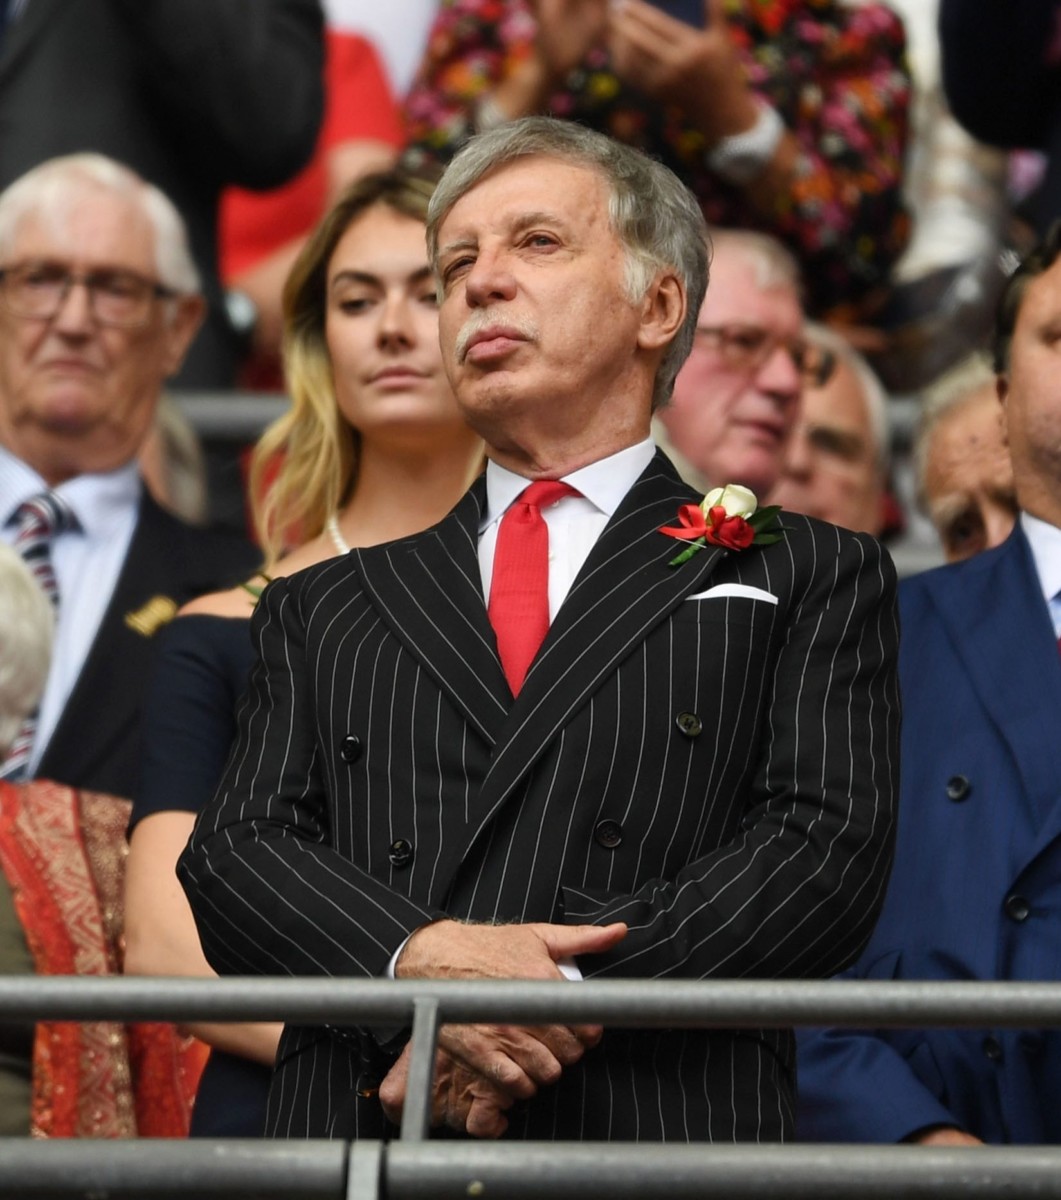 Stan Kroenke has turned the Gunners into a spent force